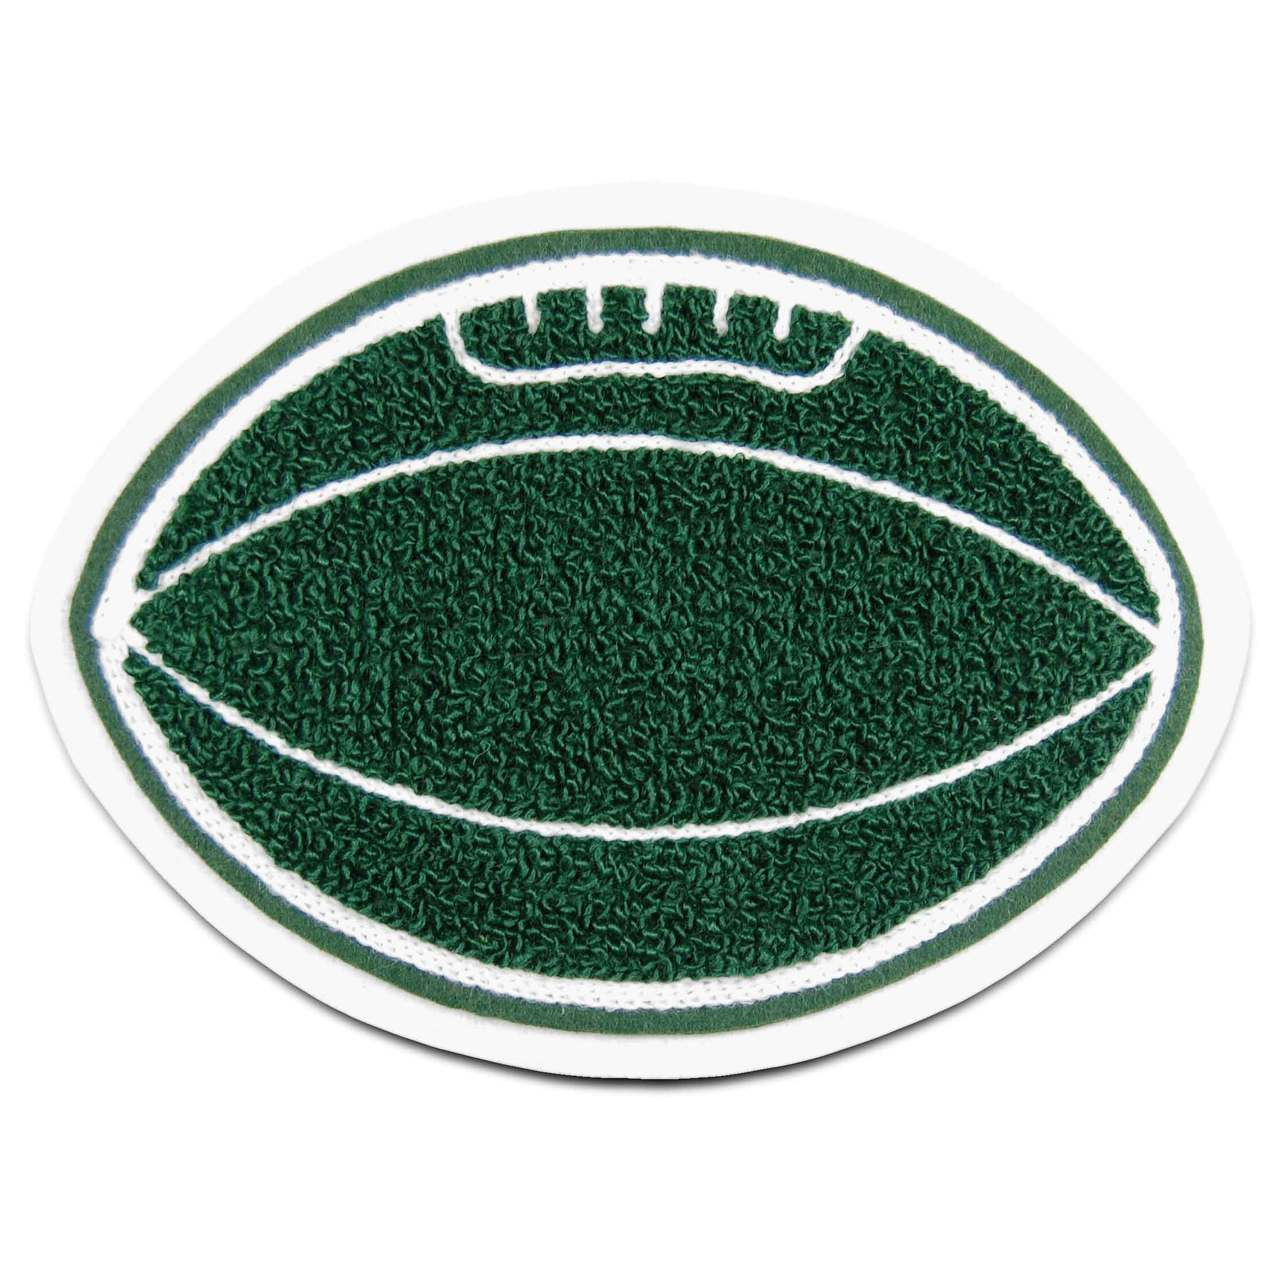 Rugby Sports Patch - Chenille Sport Patches for Varsity Jackets